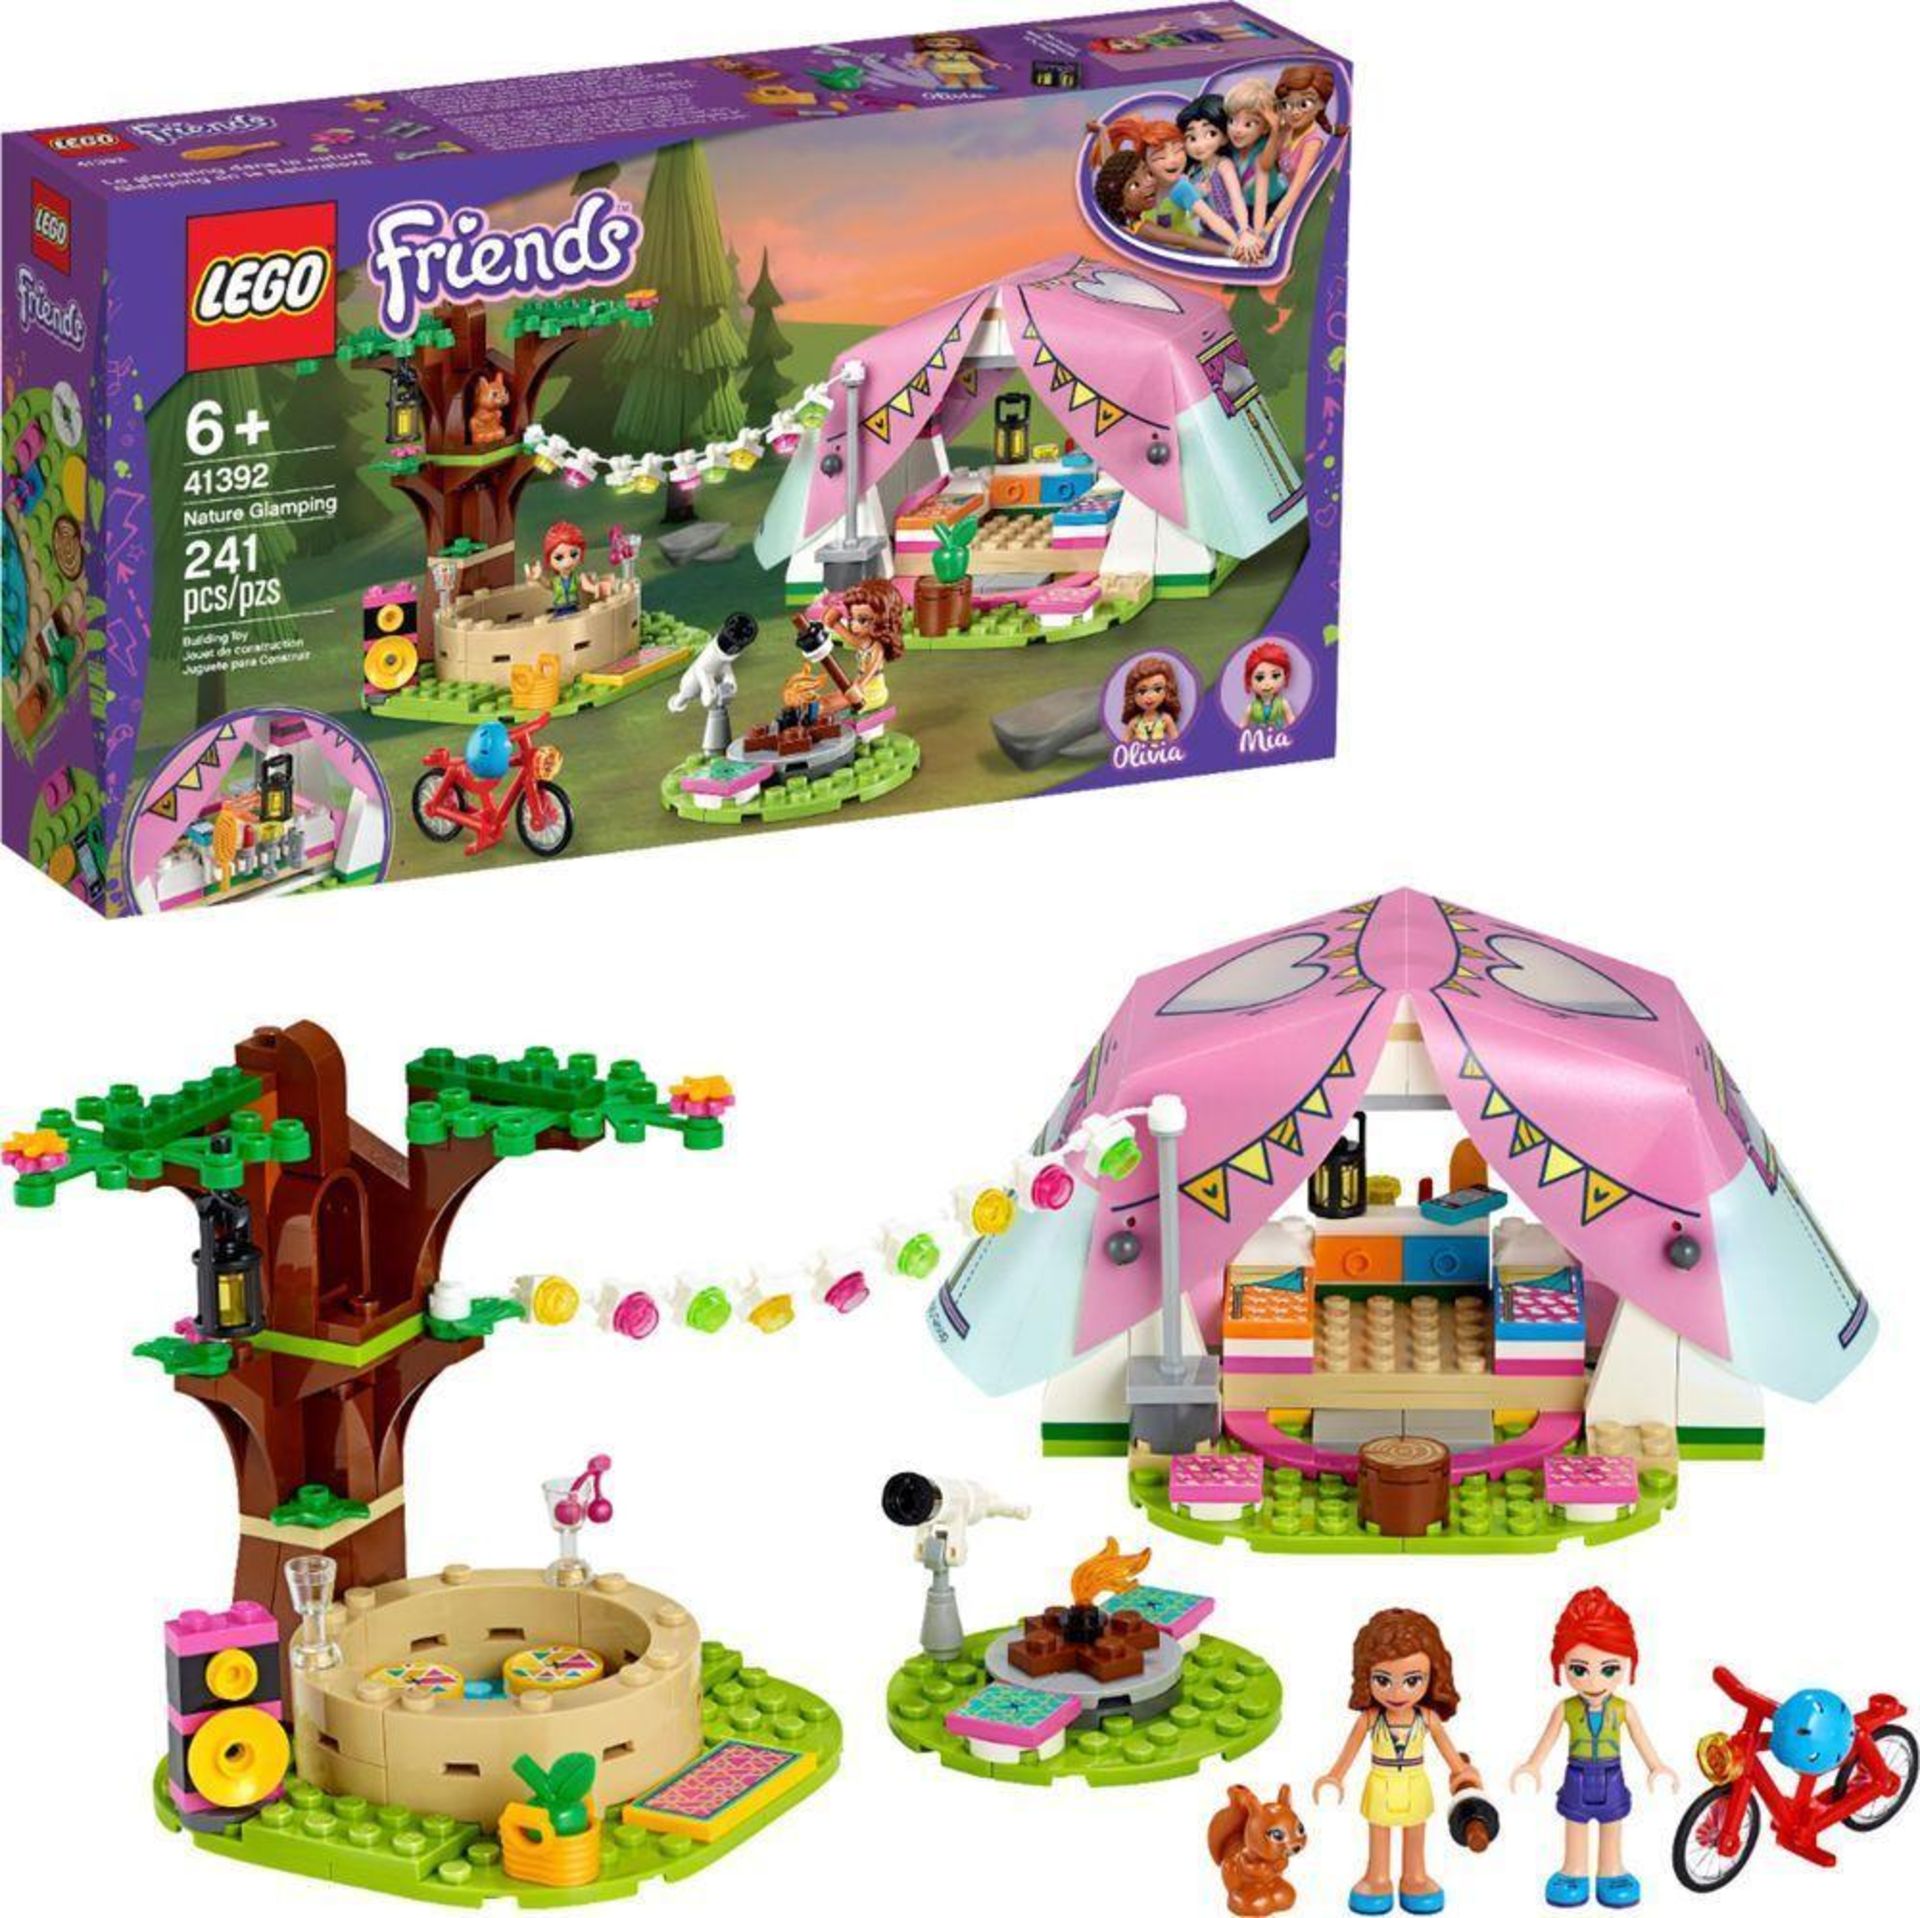 LEGO Friends Nature Glamping Outdoor Adventure Playset-41392 (735/5497) - £25.00 RRP